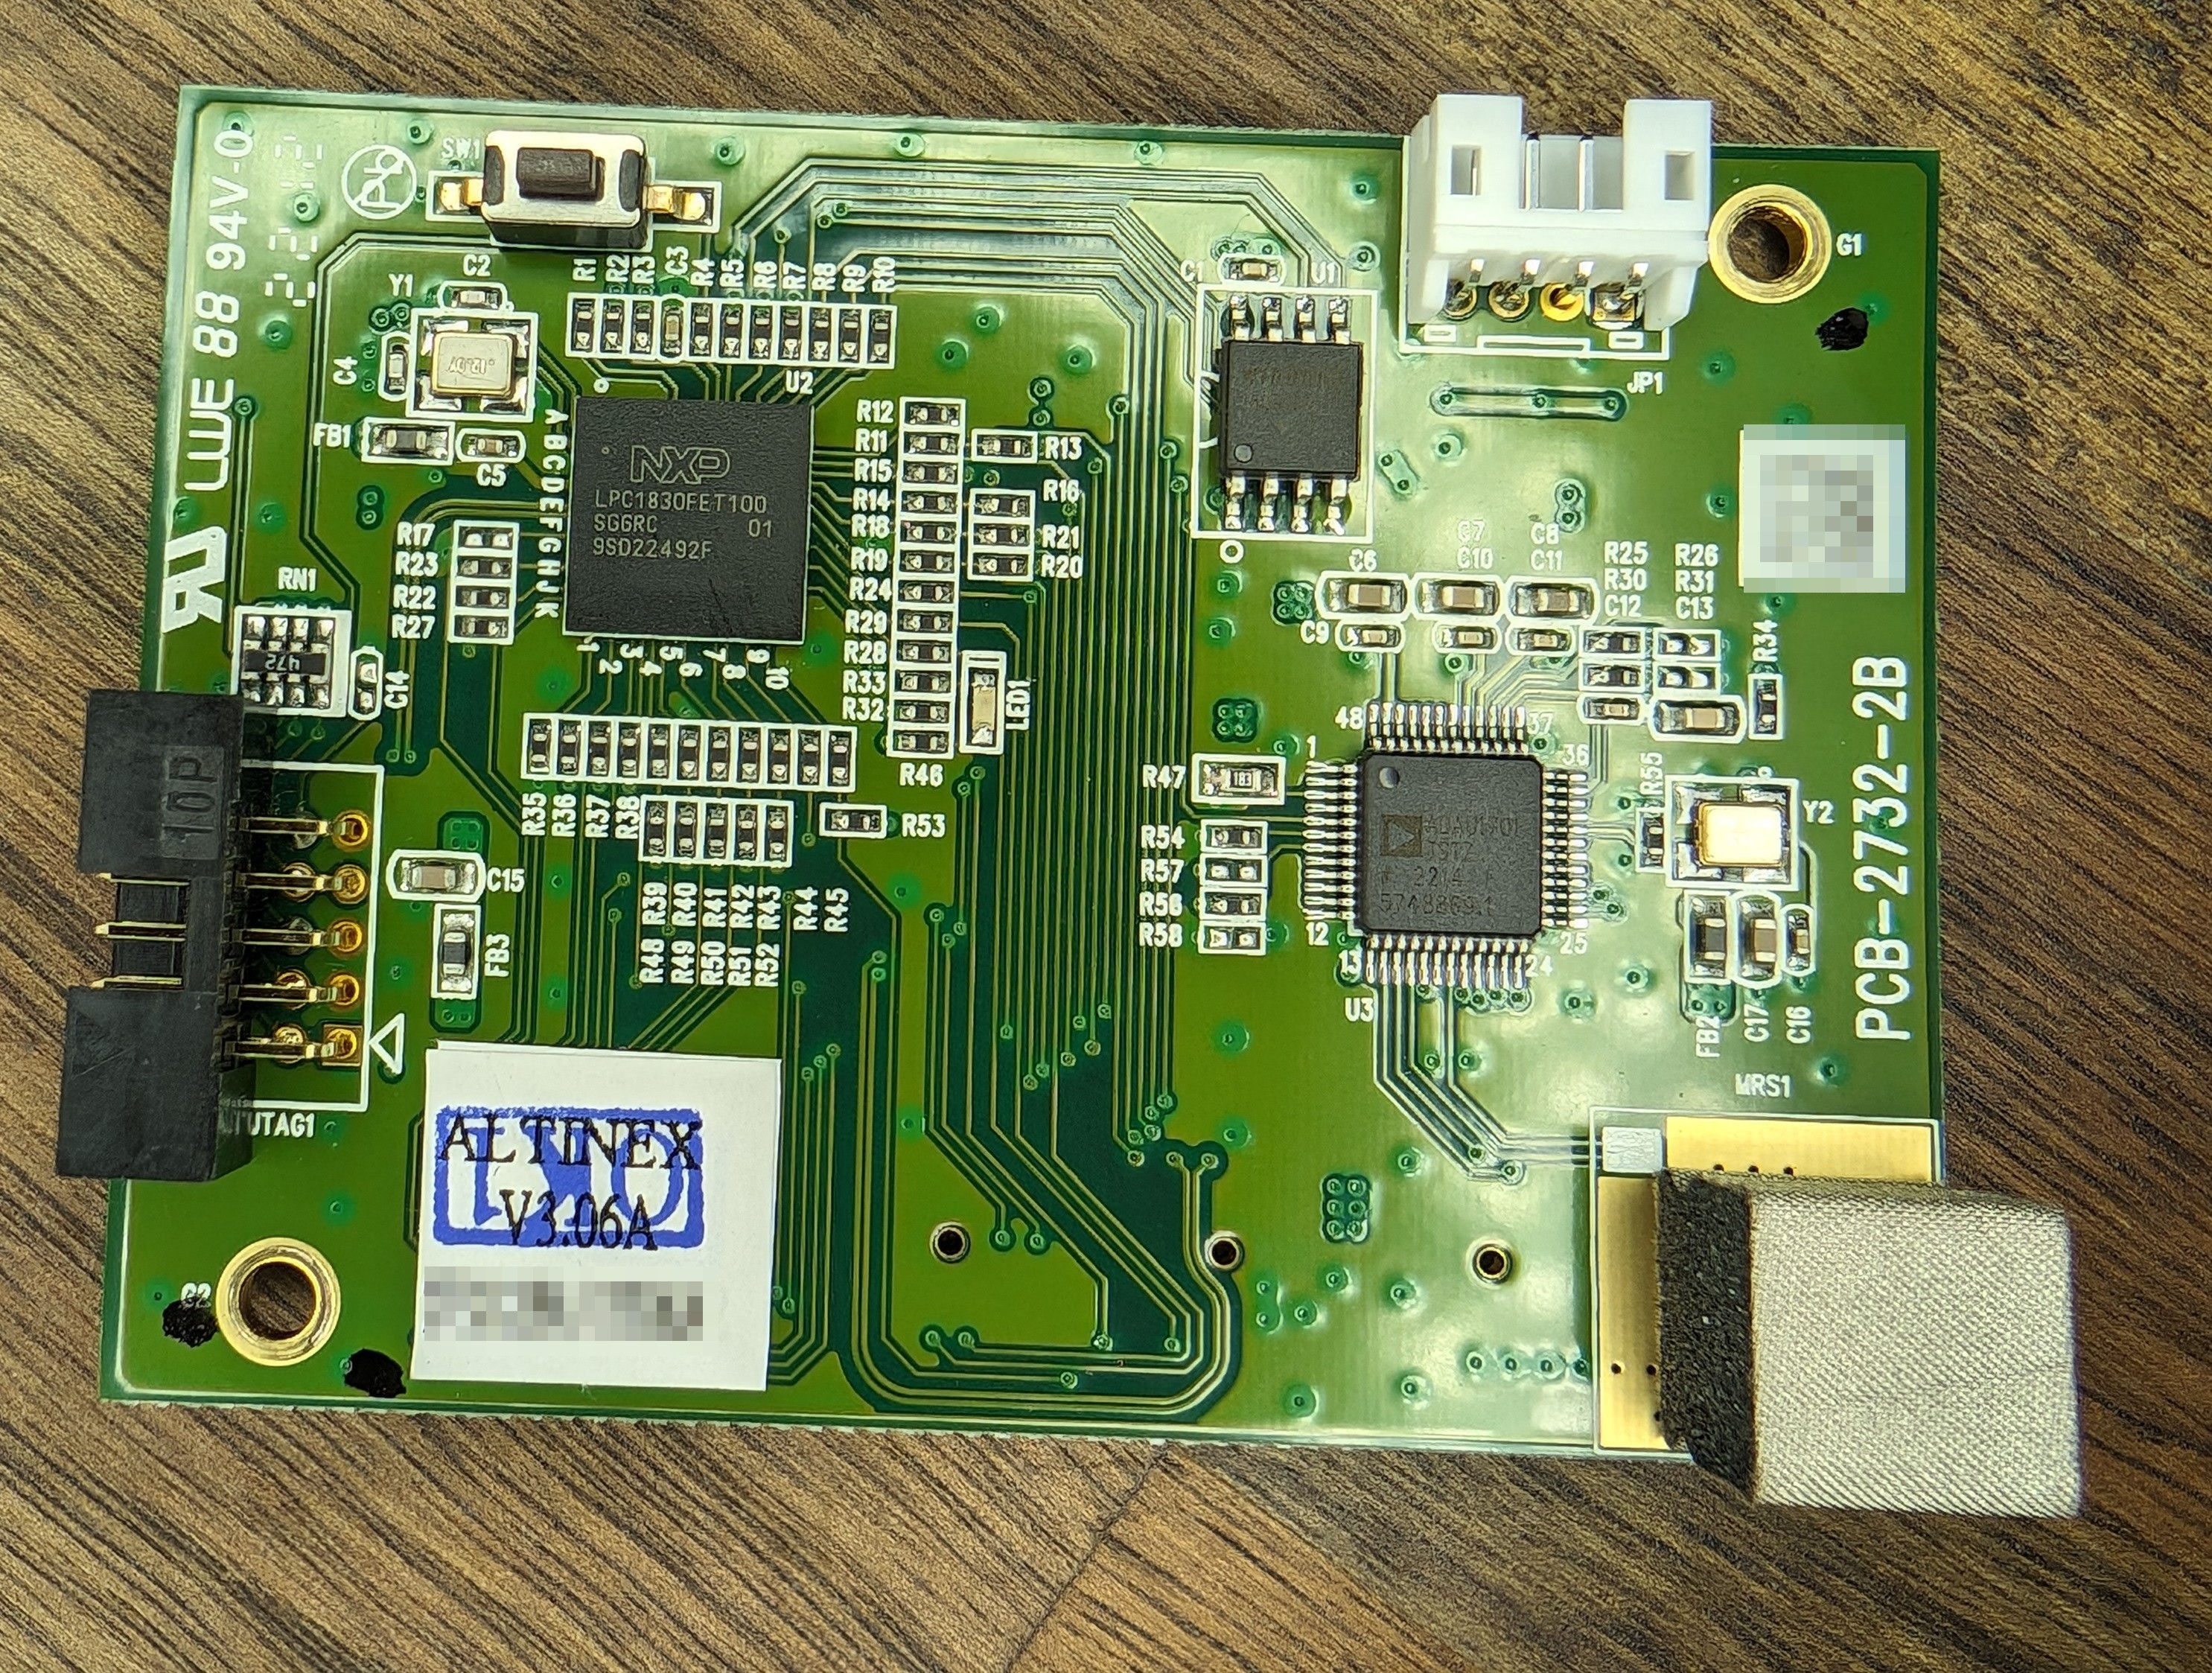 Top of the control PCB.